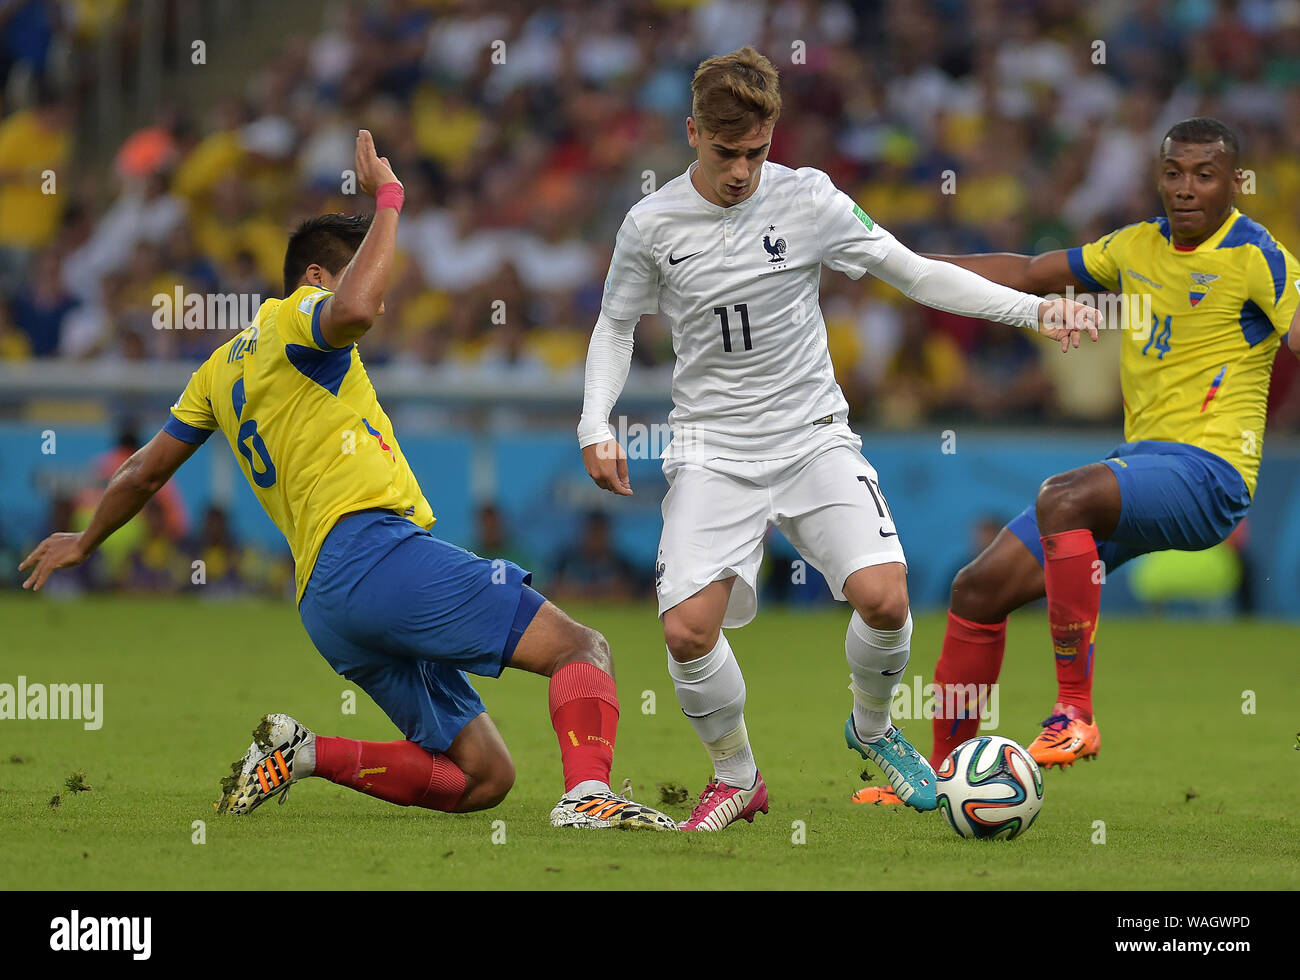 Rio de Janeiro, June 25, 2014. Football player Griezmann, during the Ecuador-France football match for the 2014 World Cup at the Maracanã Stadium in R Stock Photo